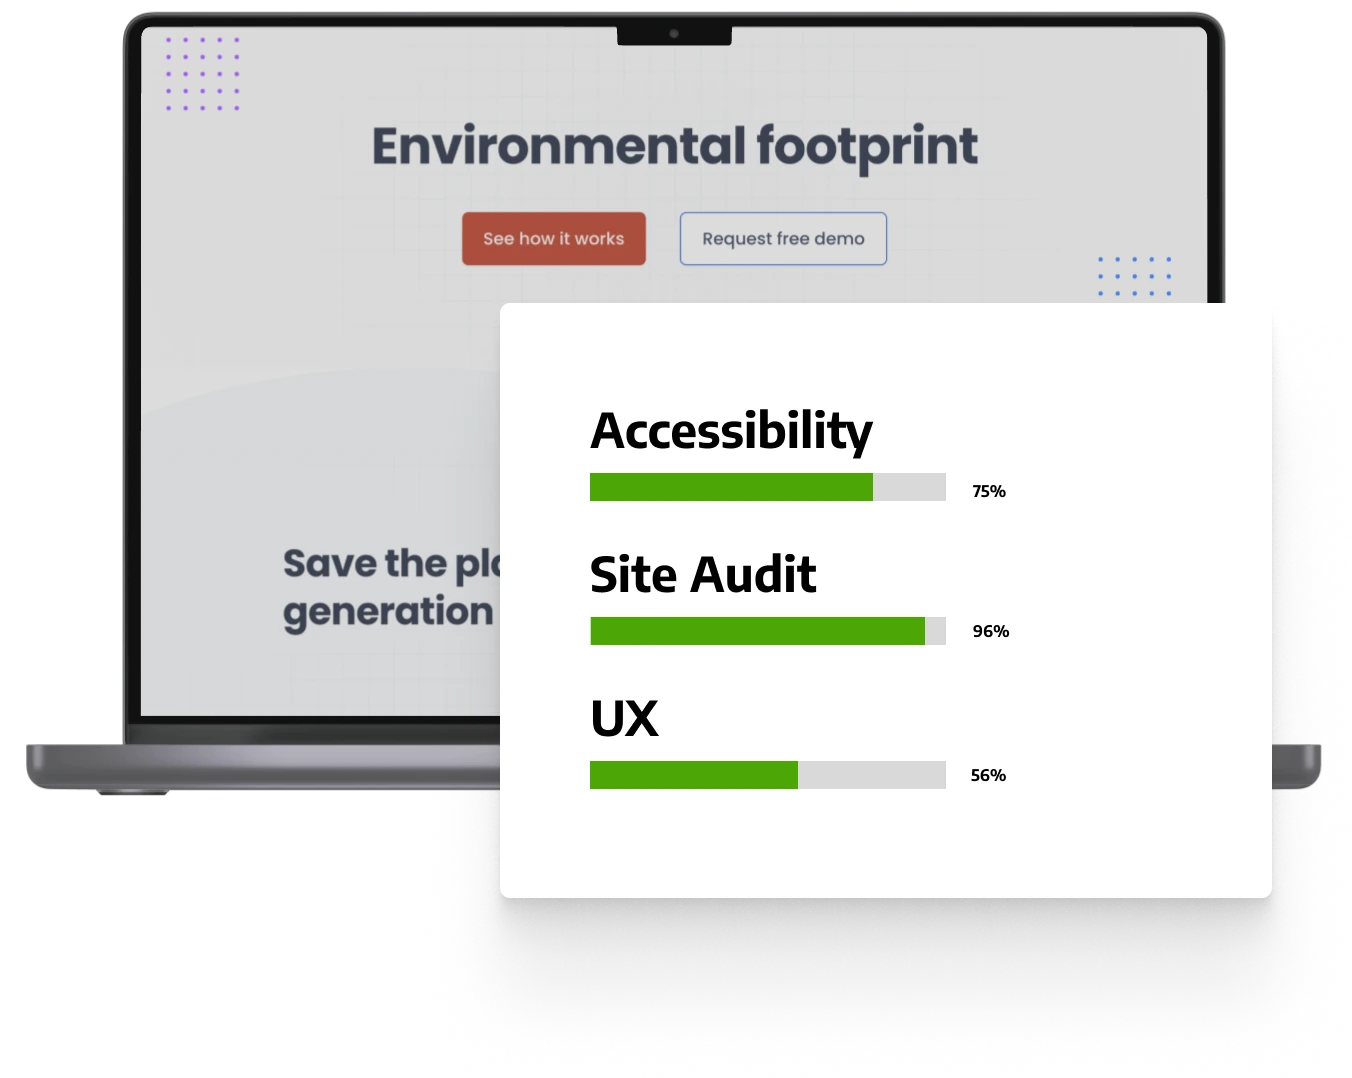 A laptop with a website is scanned and the overlay on top of the laptop shows a 75% accessibility score, a 96% site audit score and a 56% UX score.